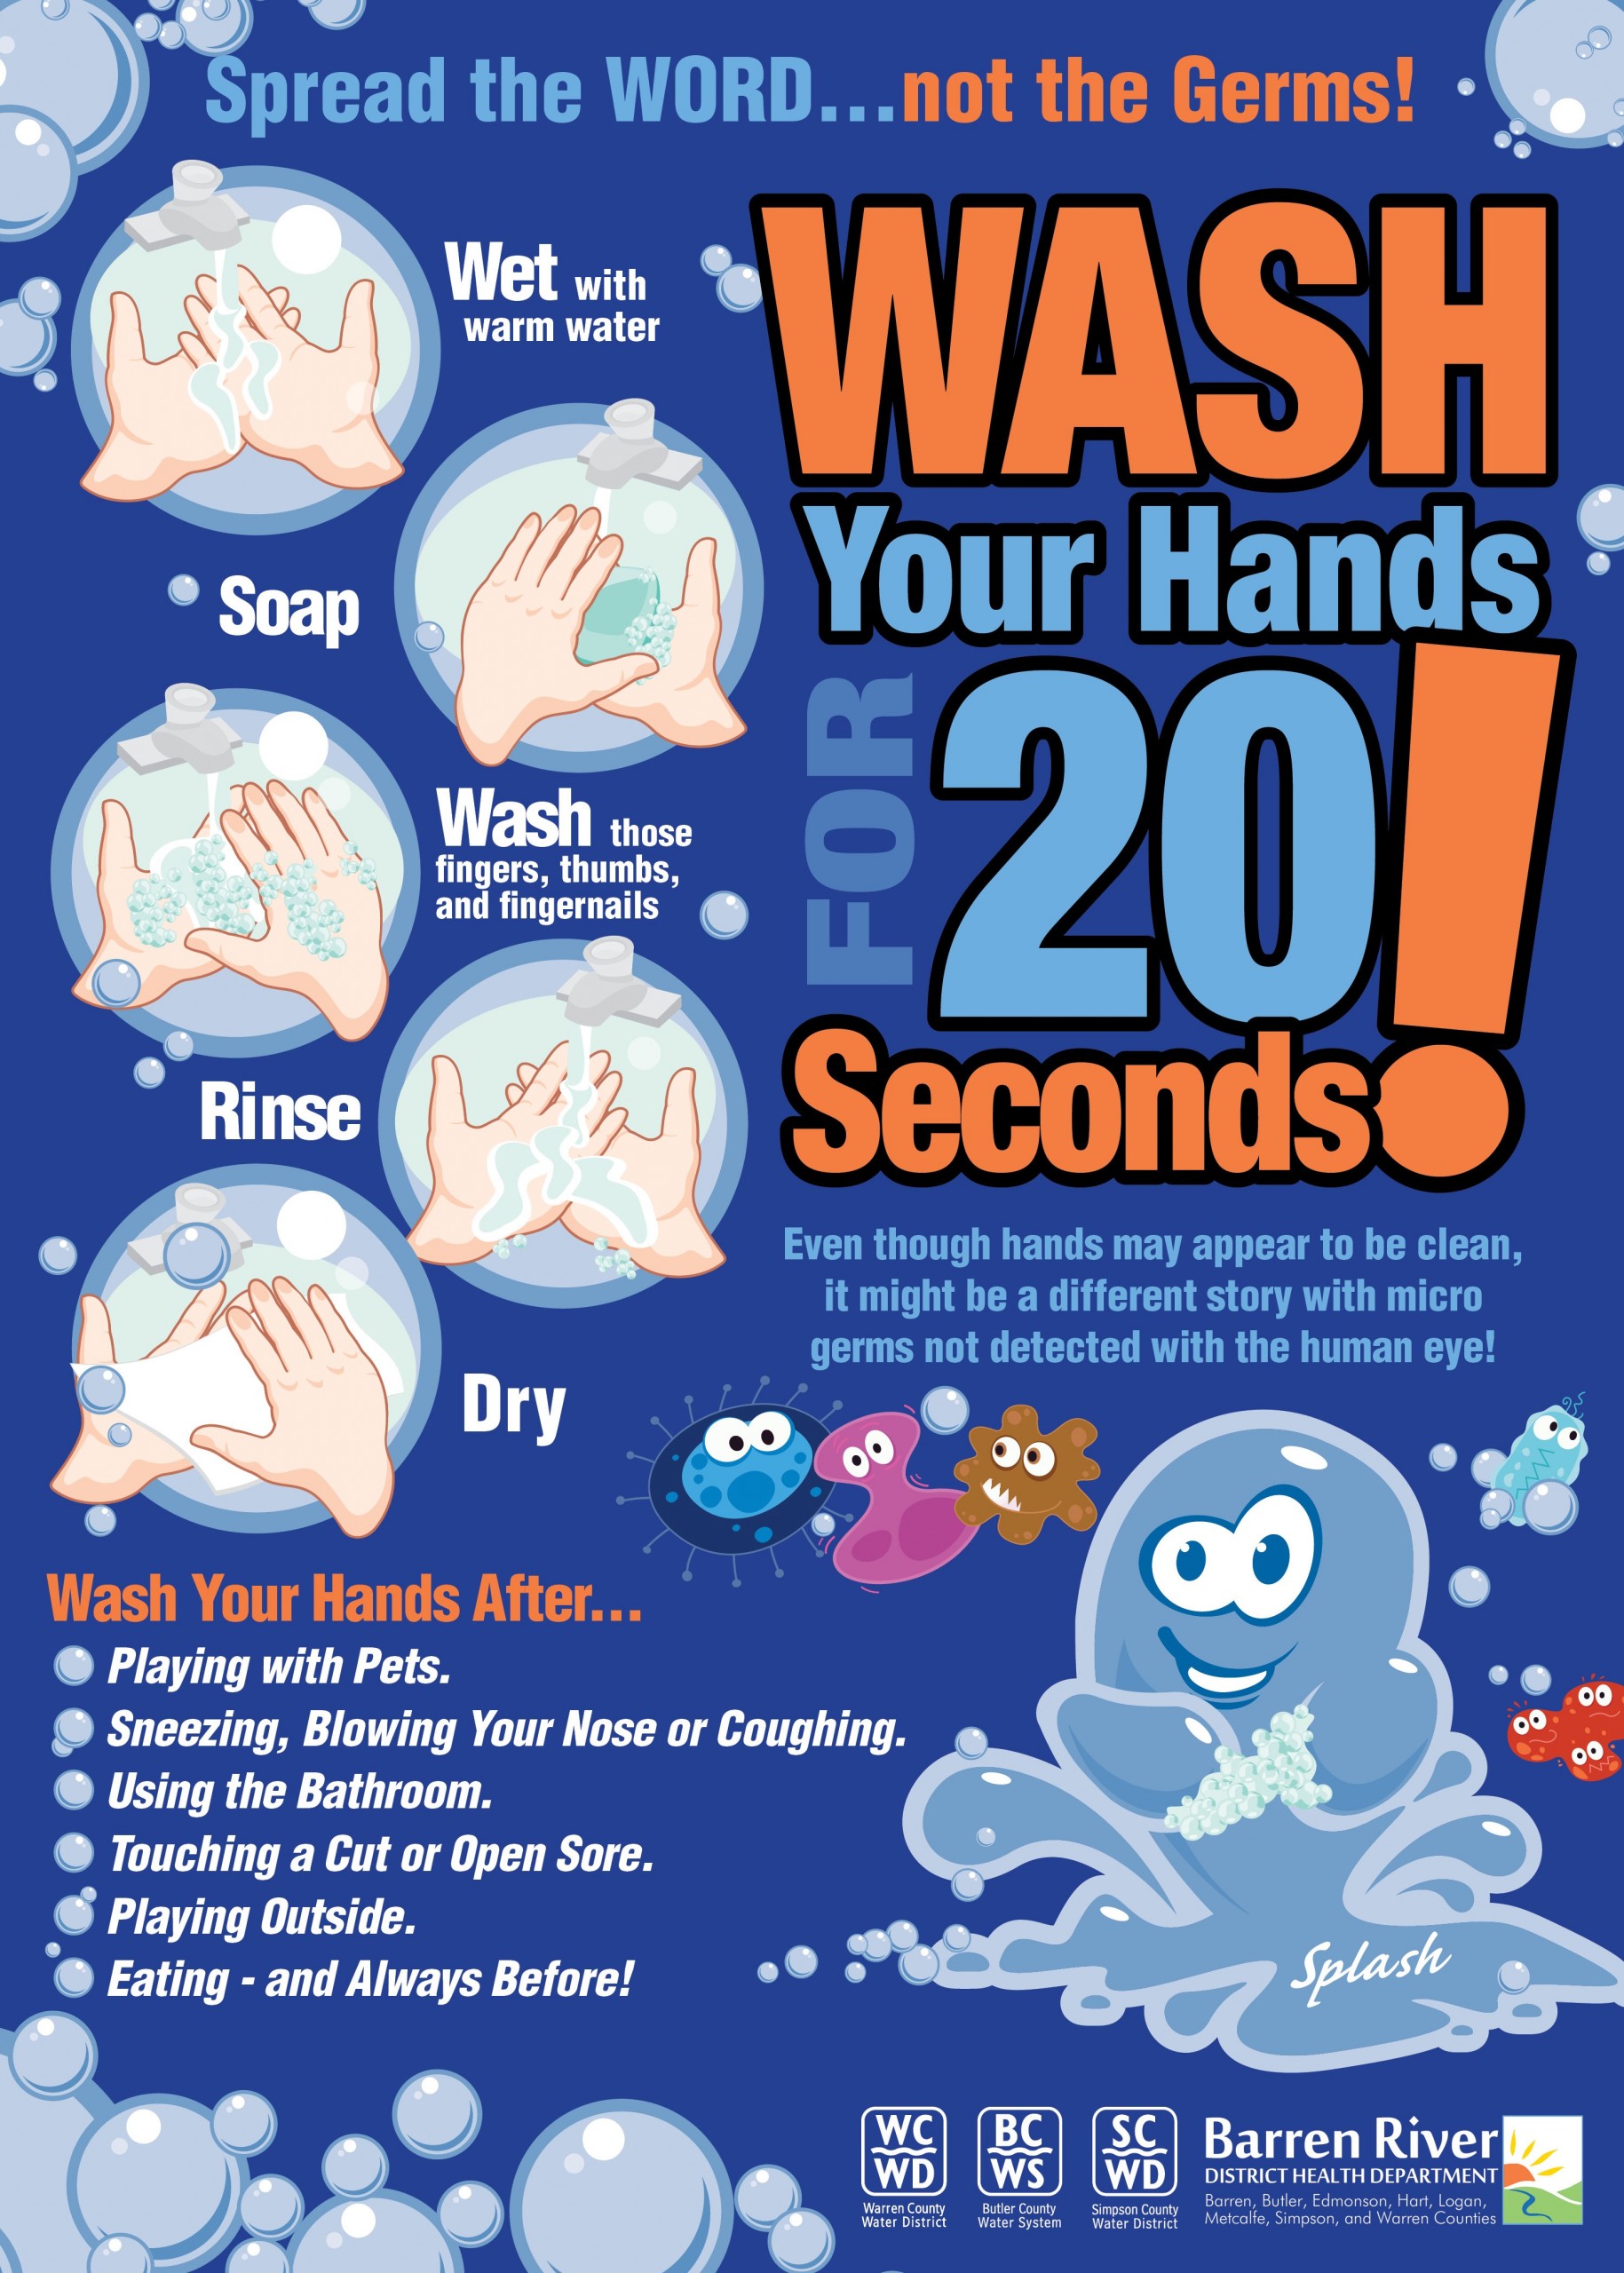 Local water districts support 'Wash Your Hands' campaign - WNKY News 40 ...